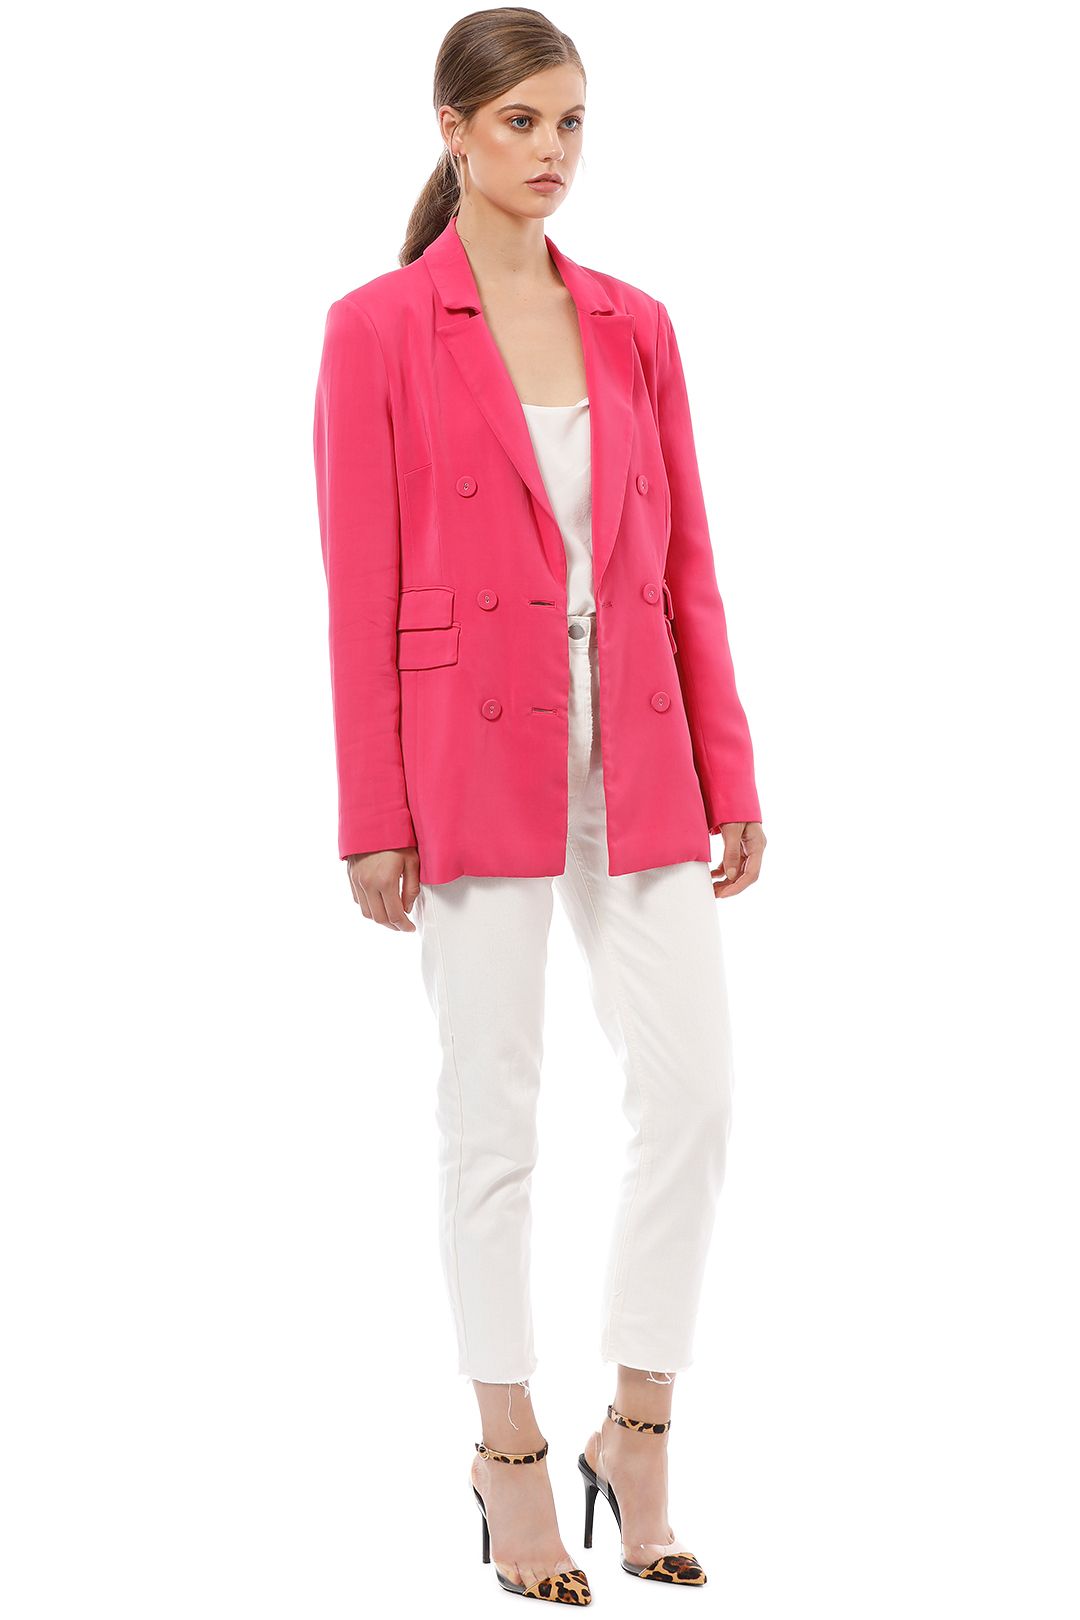 CMEO Collective - Own Light Blazer - Pink - Side